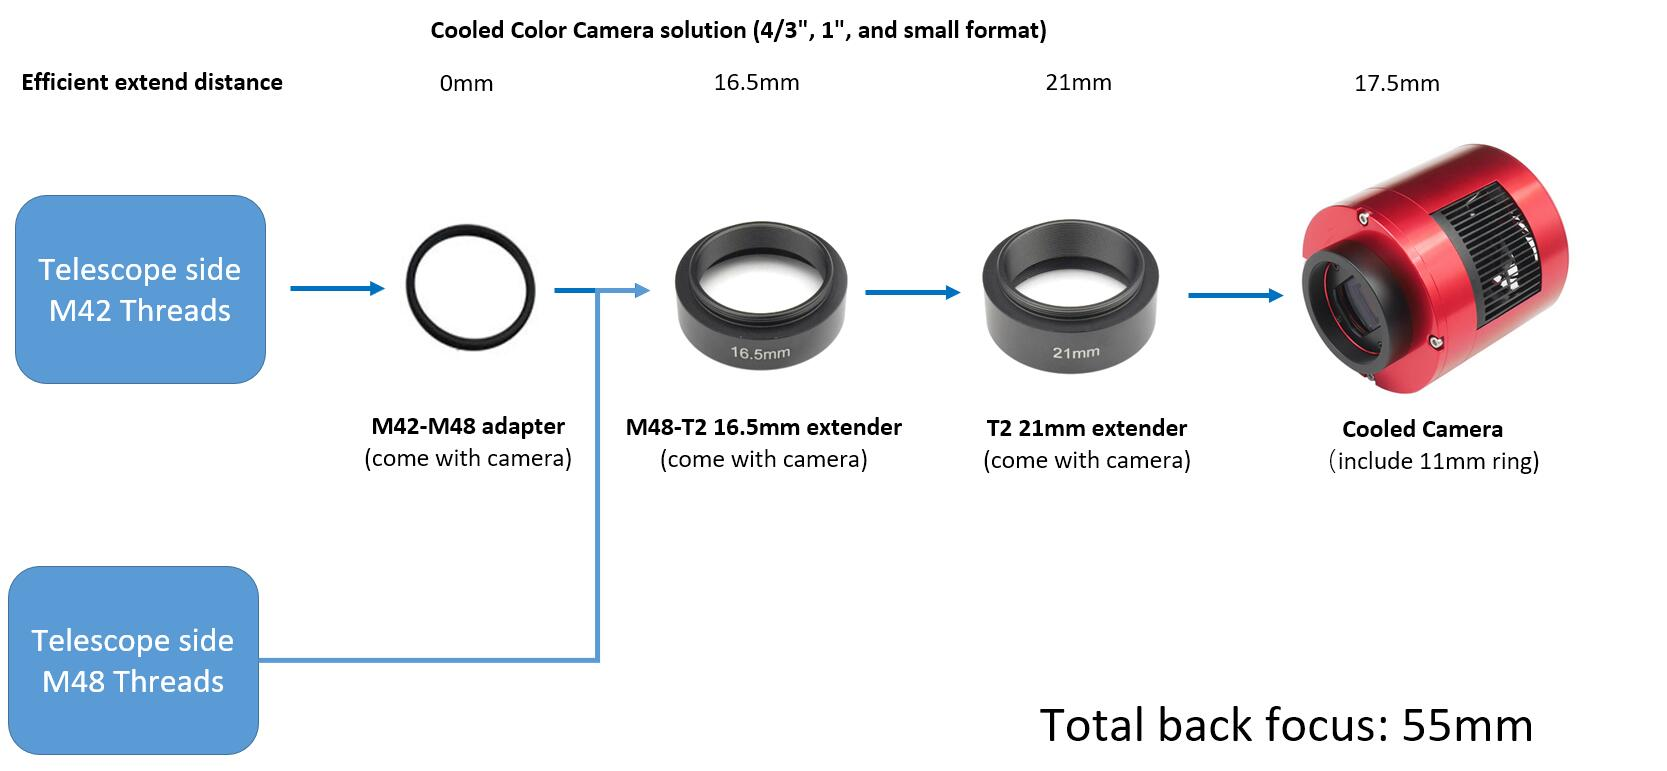 Cooled Color Camera solution